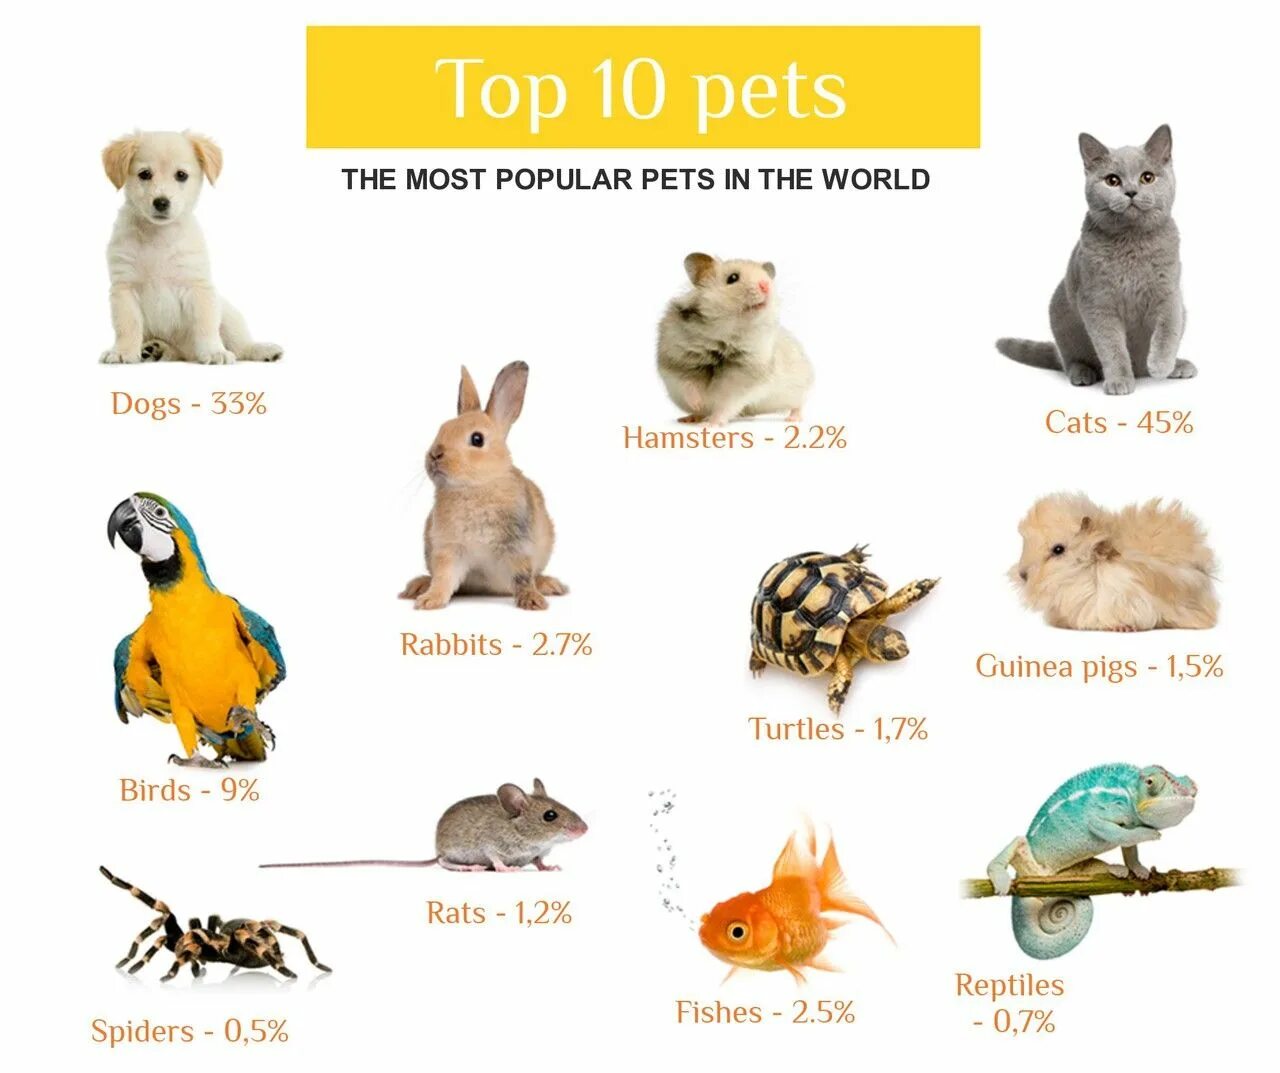 Pets in russia. The most popular Pets. My Pet. What s your favourite animal. The most popular Pets in Russia.